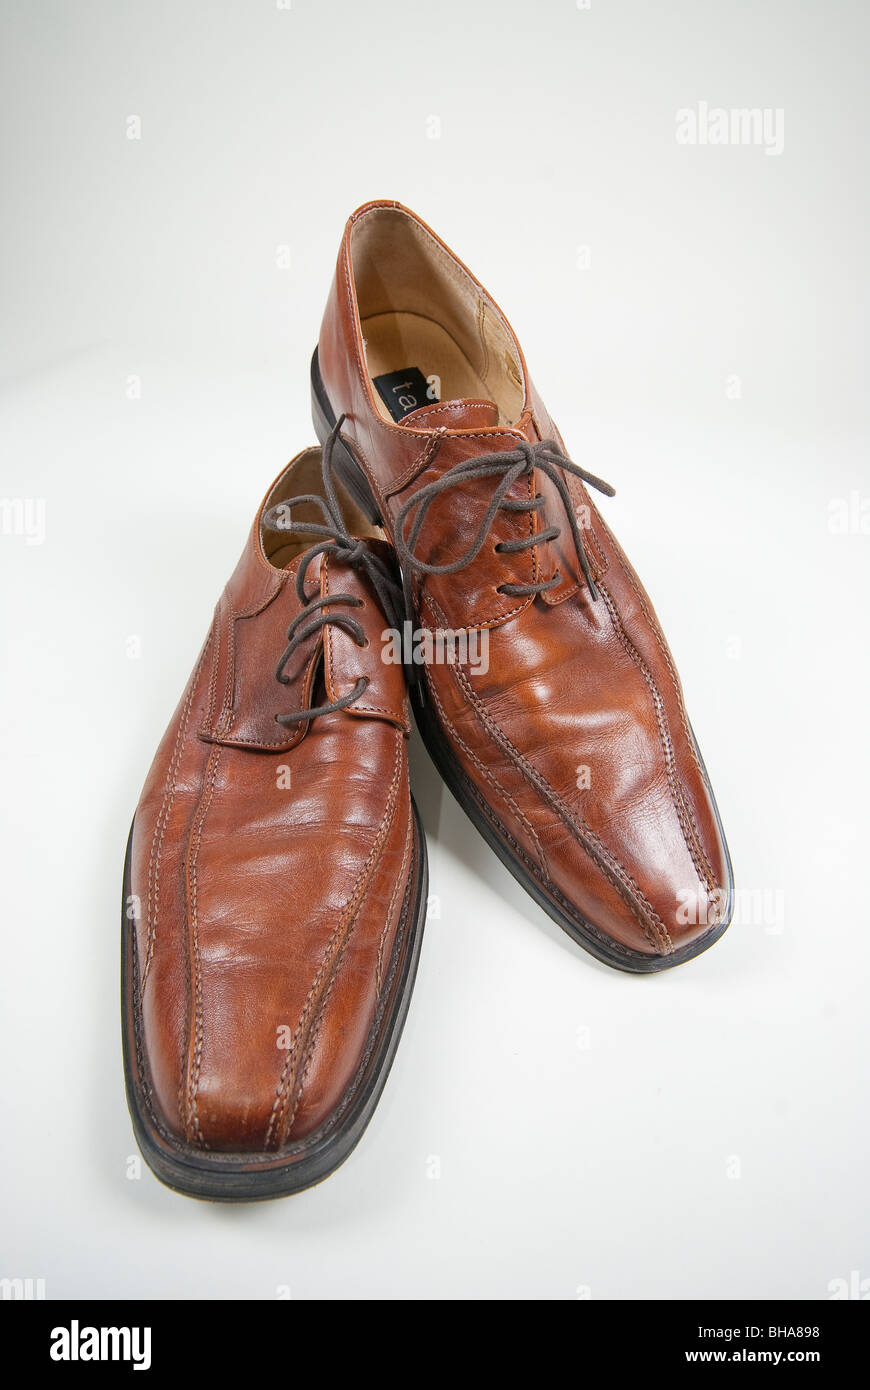 Pair of neat brown gentleman's shoes Stock Photo - Alamy